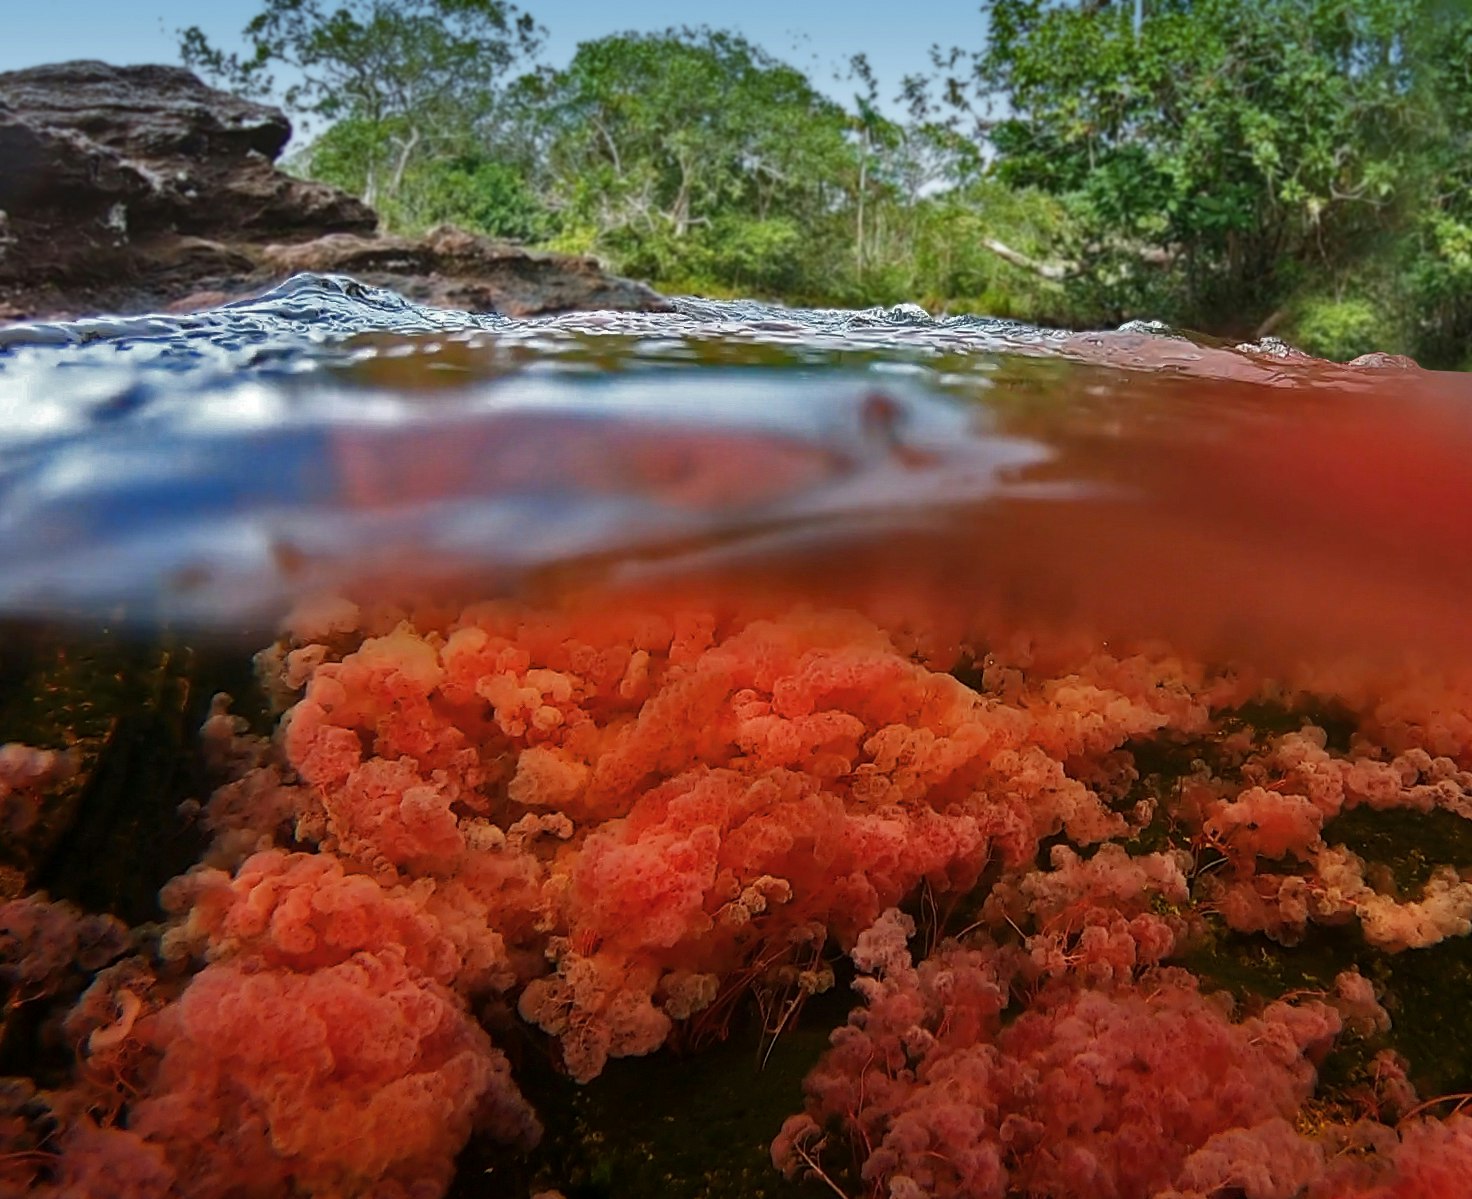 Red algae known as clavigera macarenia glows in shades of bright red, orange, and pink under the waters of the Cano Cristales river in Colombia